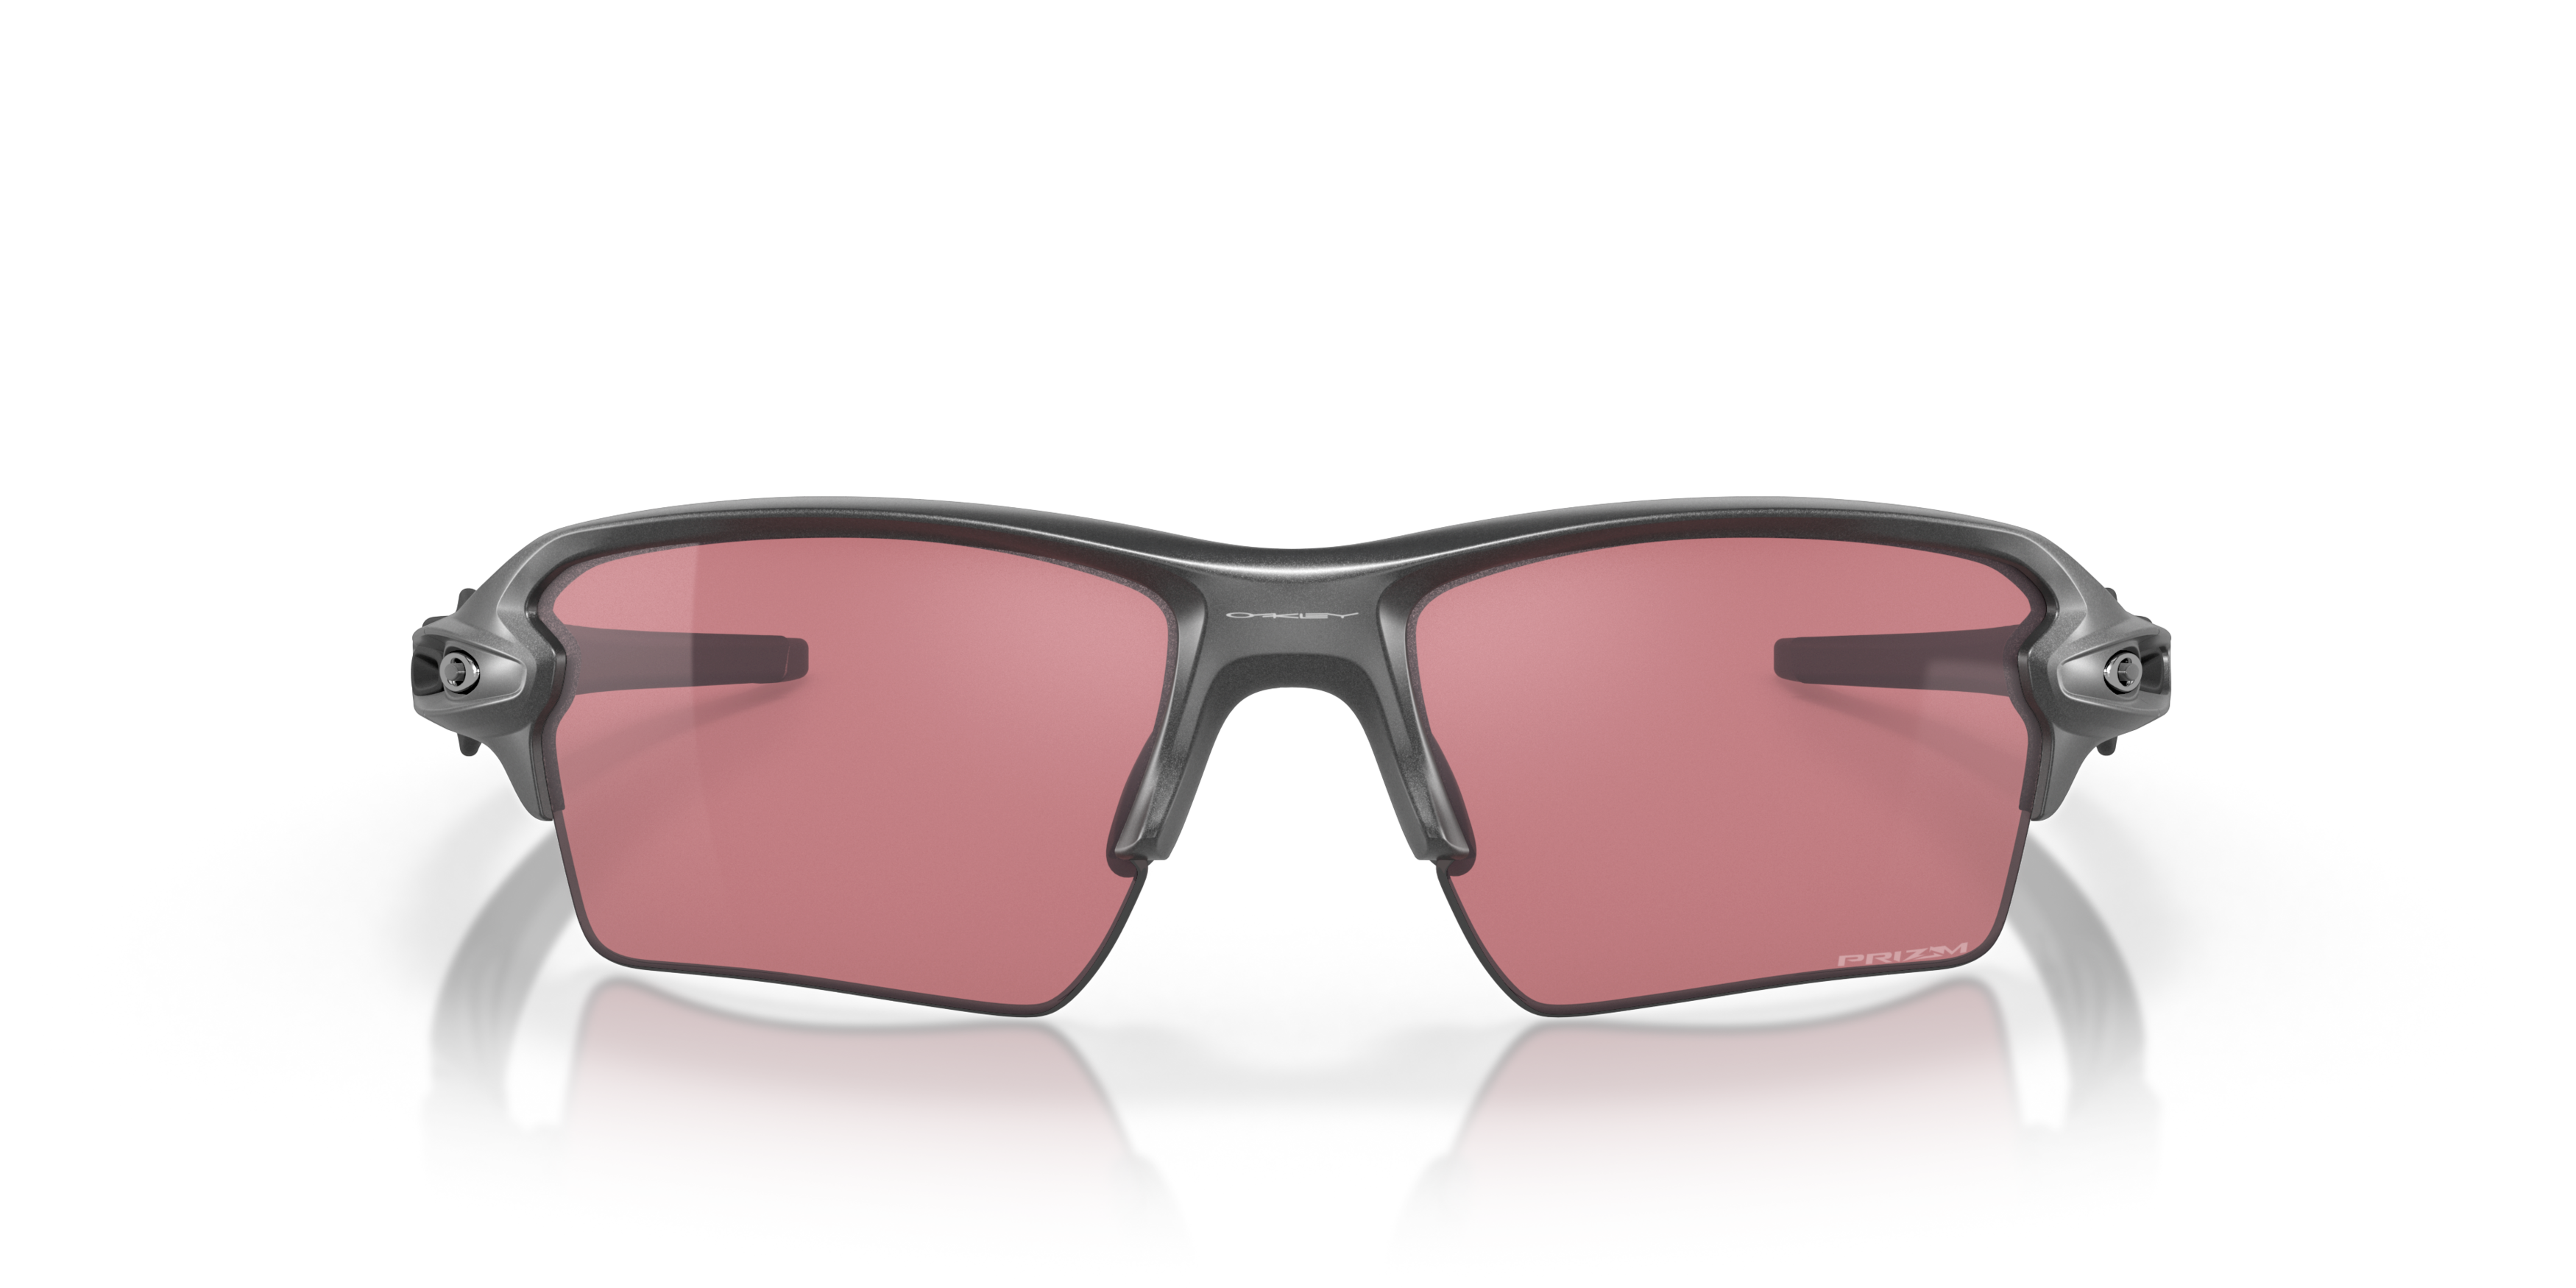 [products.image.front] OAKLEY FLAK 2.0 XL OO9188 9188B2